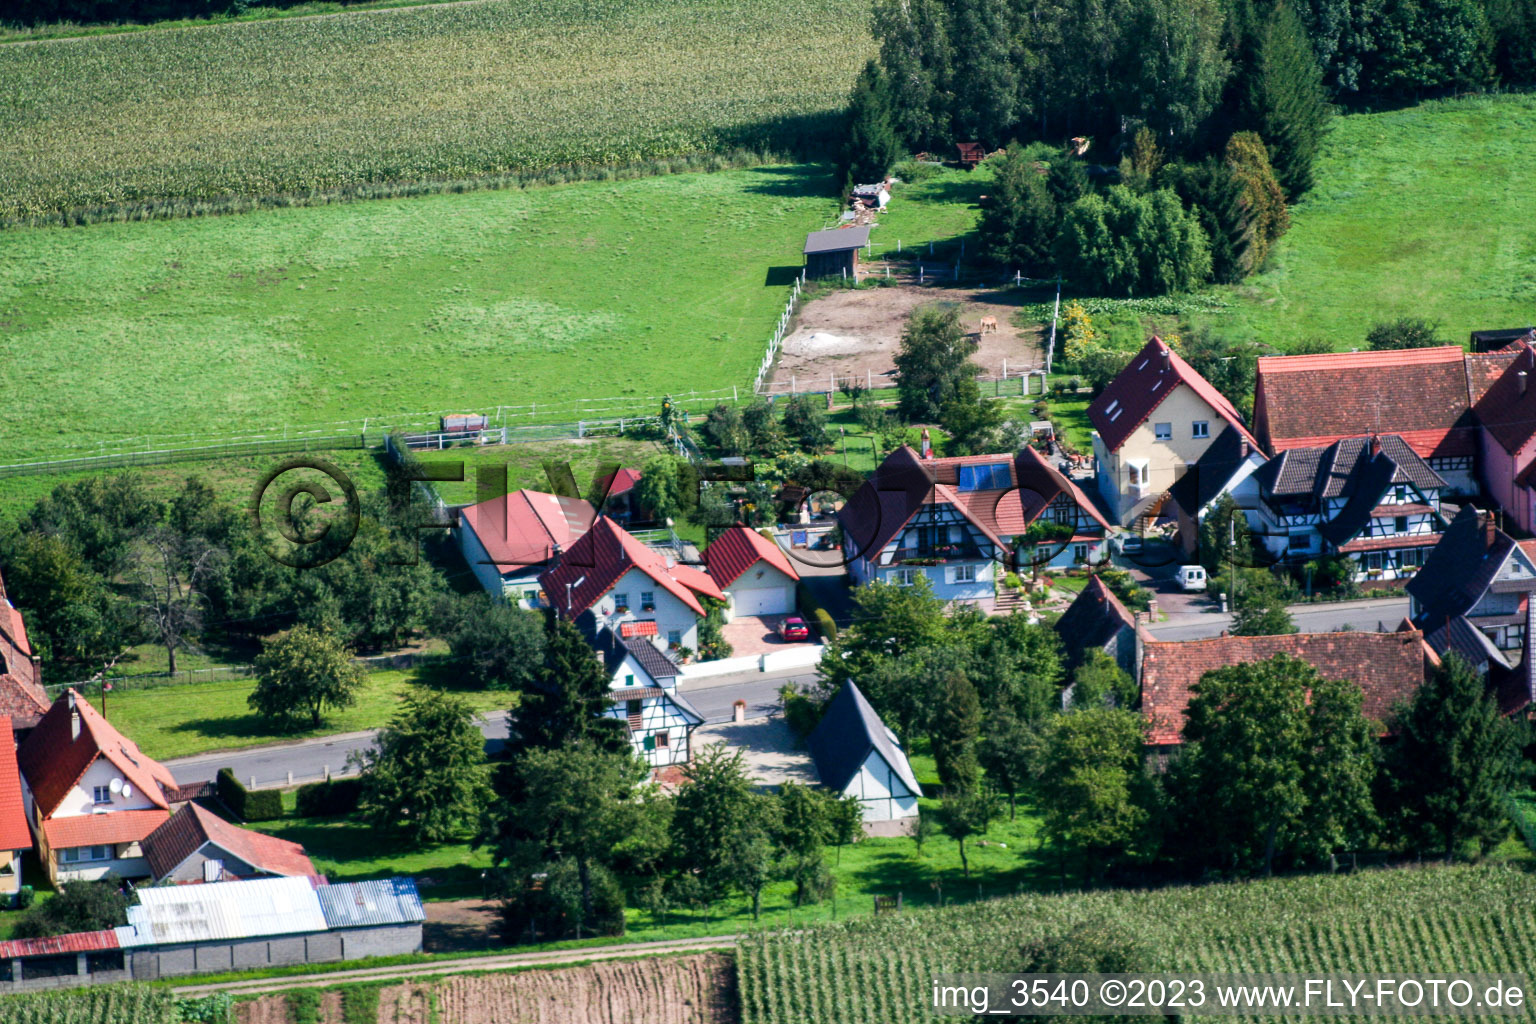 Schleithal in the state Bas-Rhin, France from the drone perspective